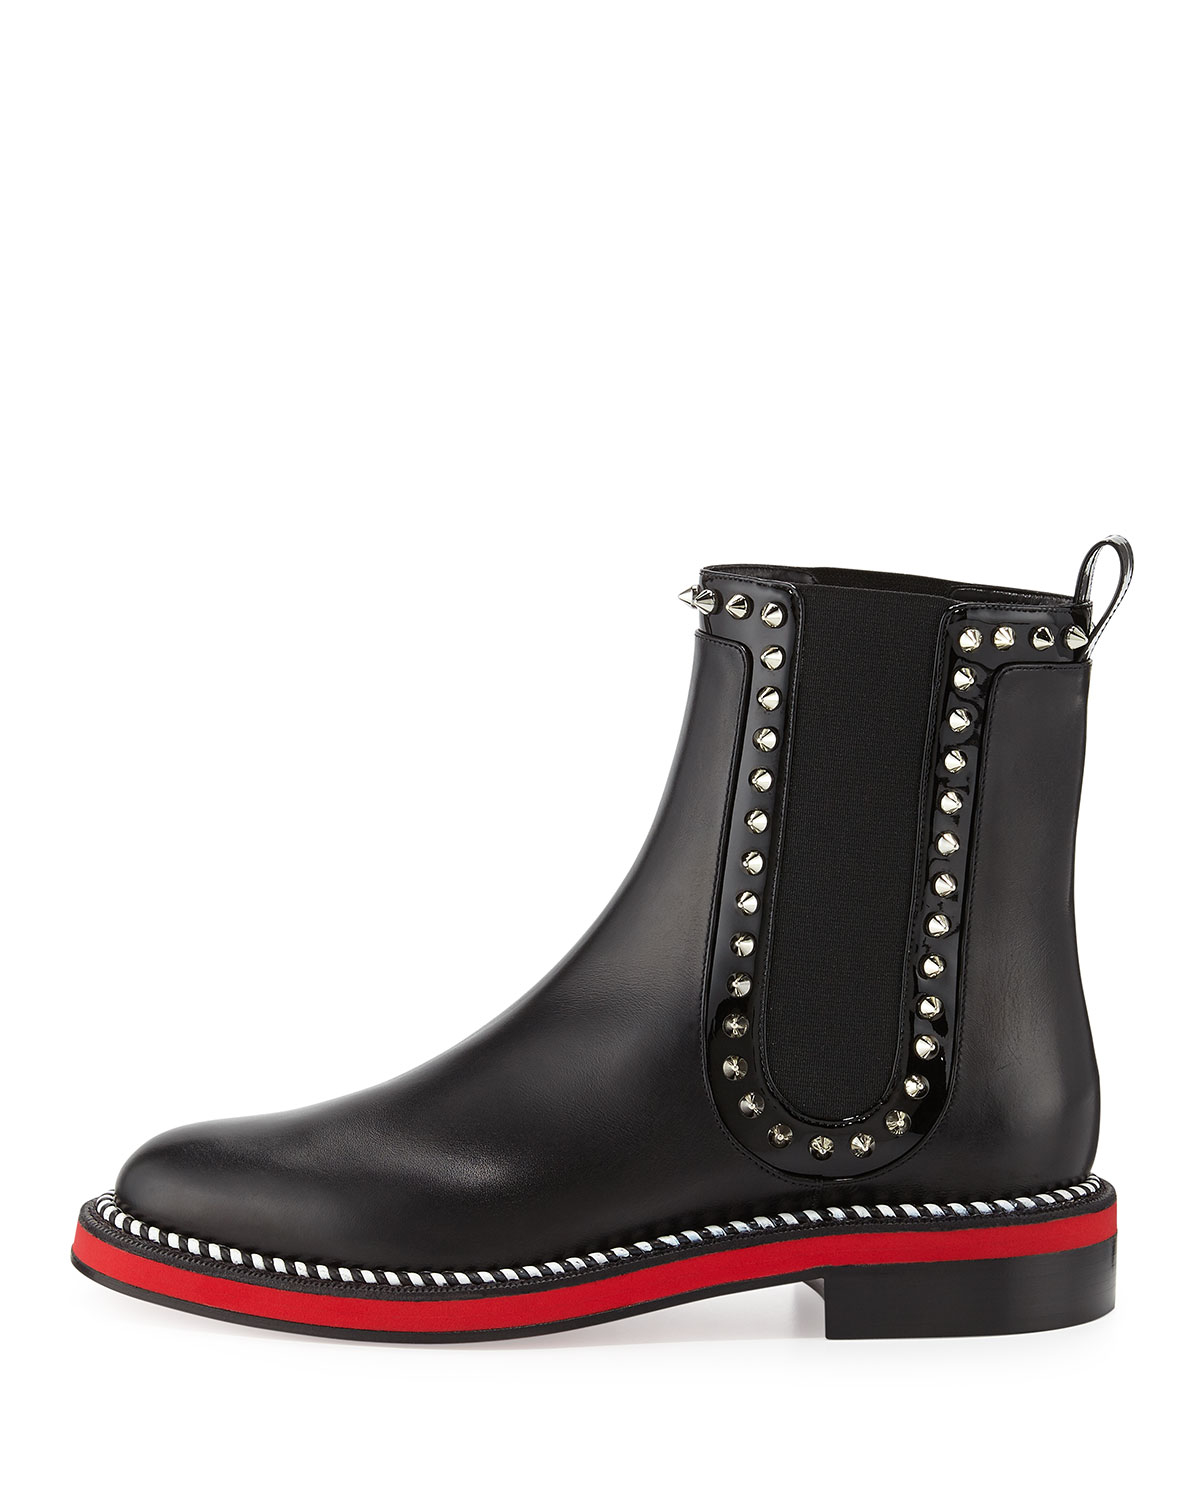 Lyst - Christian Louboutin Nothing Hill Red Sole Boot in Black